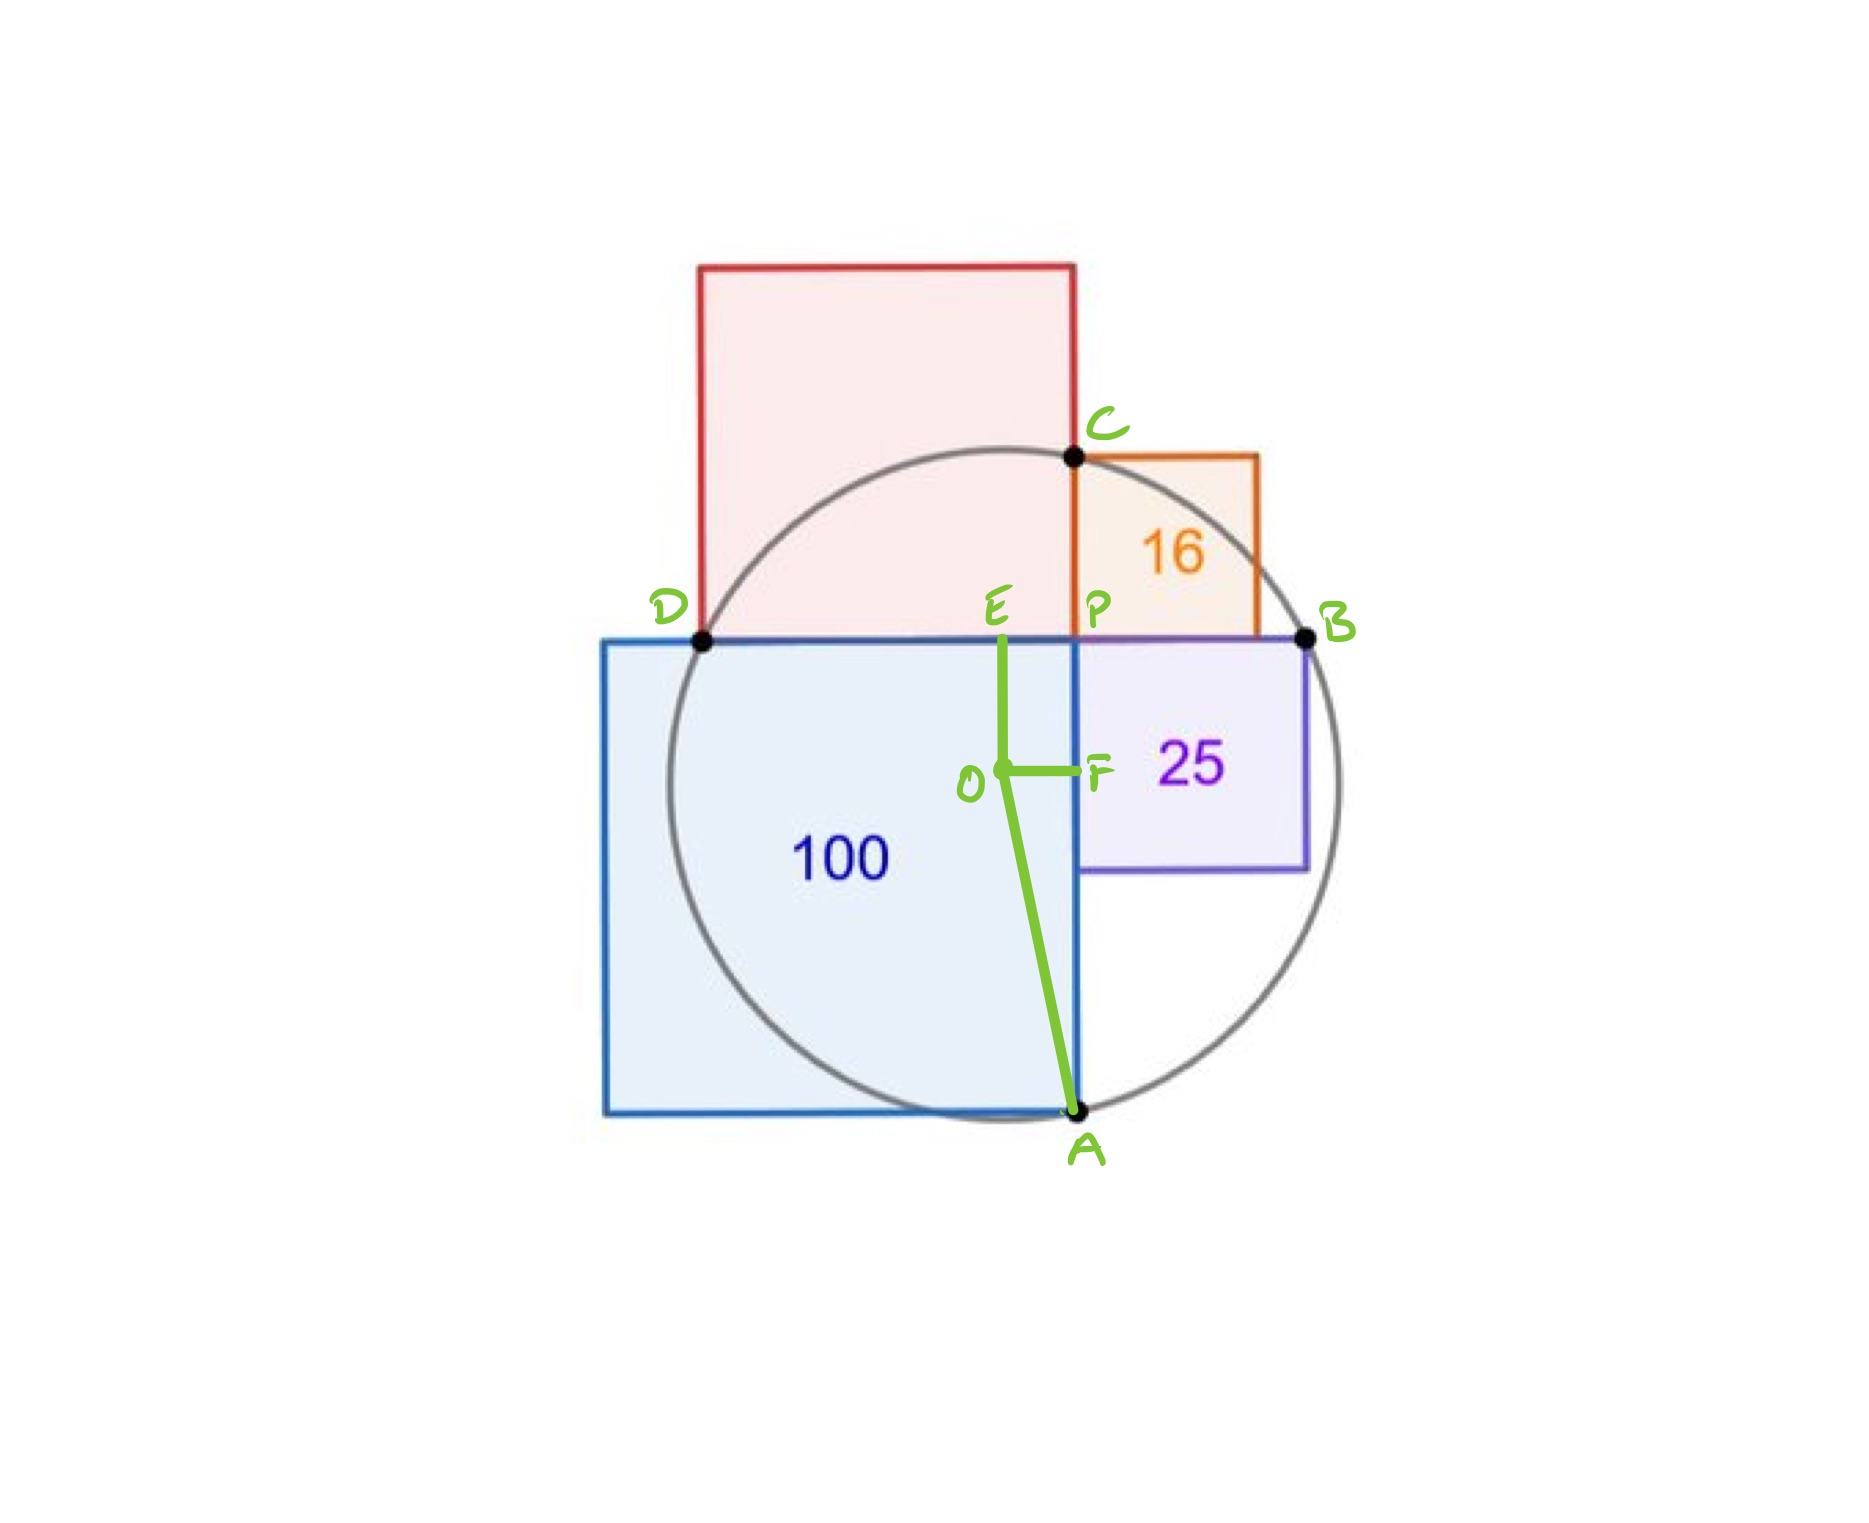 Four squares overlapping a circle labelled